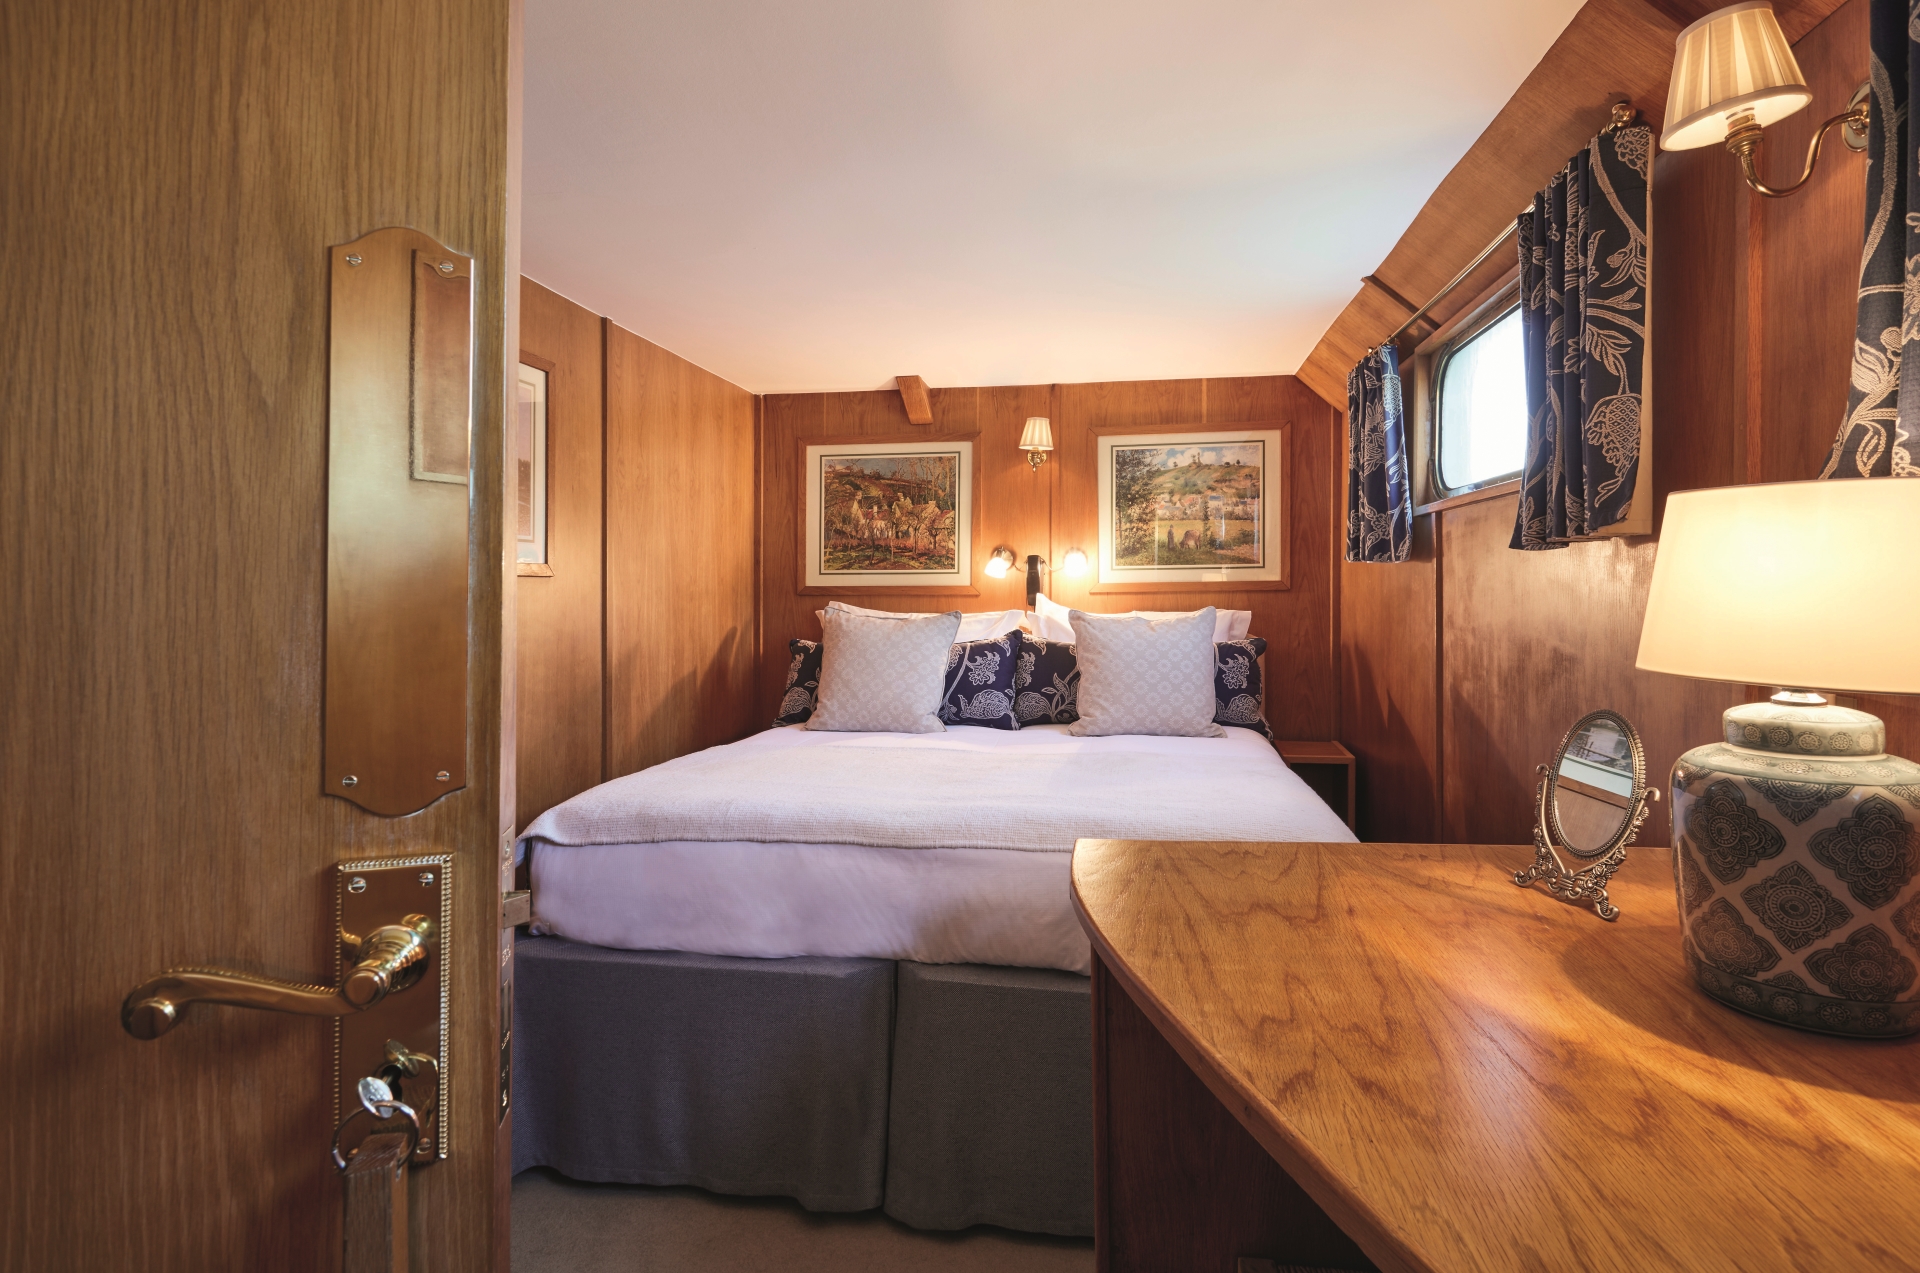 Belmond Napoleon bedroom - The French waterways by luxury barge